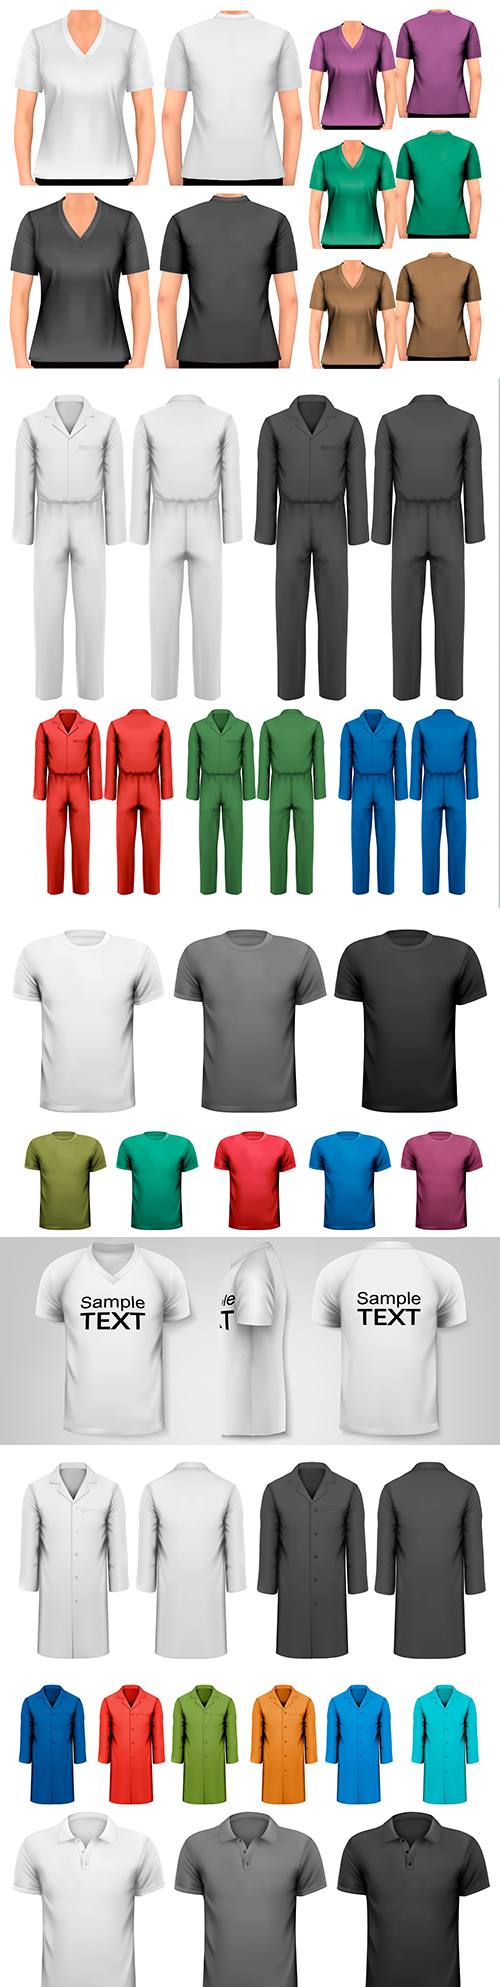 Black and white and colored men's T-shirts and workwear
